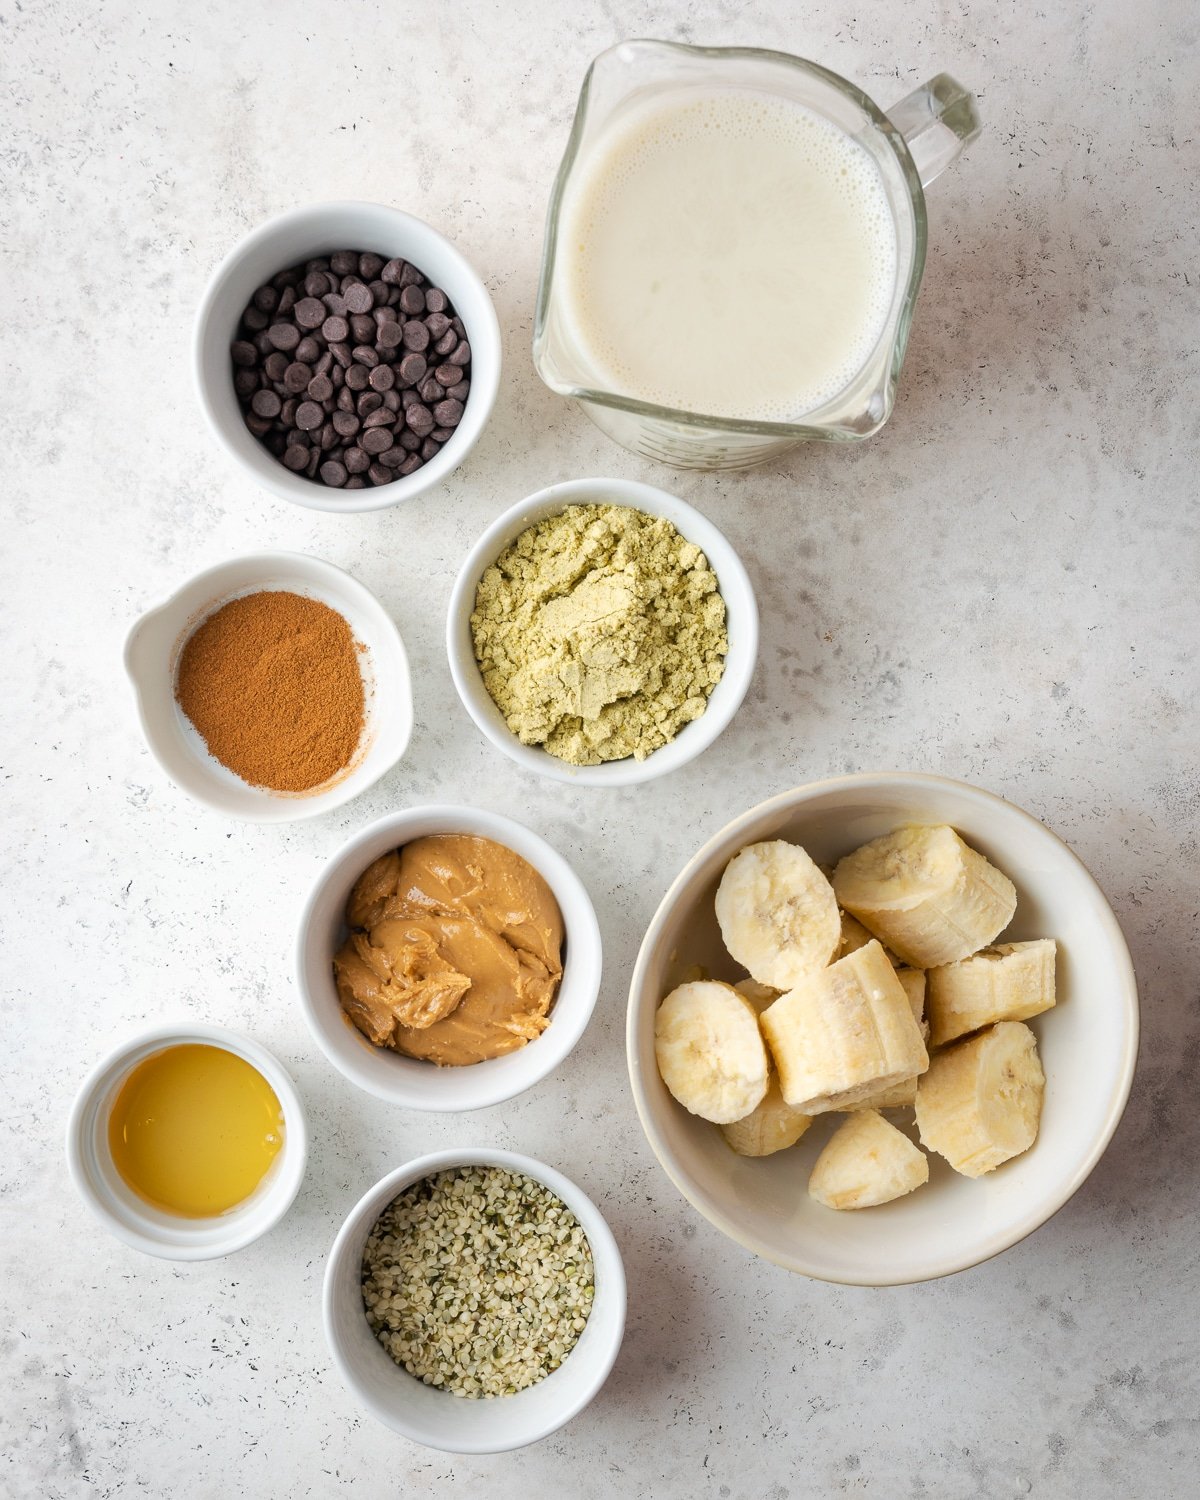 ingredients to make a smoothie in small bowls